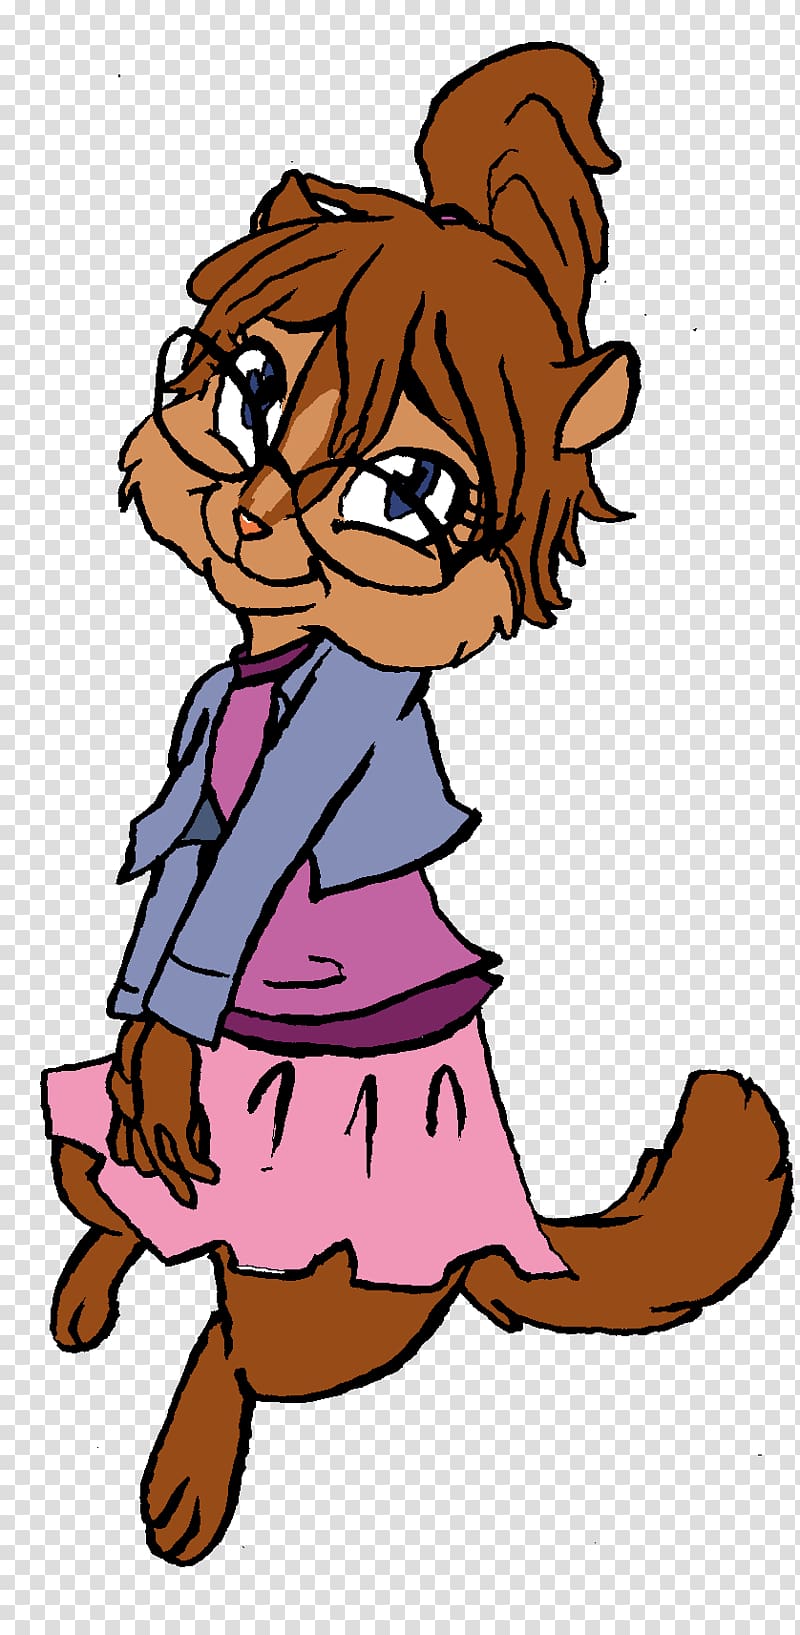 Jeanette Alvin and the Chipmunks The Chipettes Brittany, Seville East transparent background PNG clipart